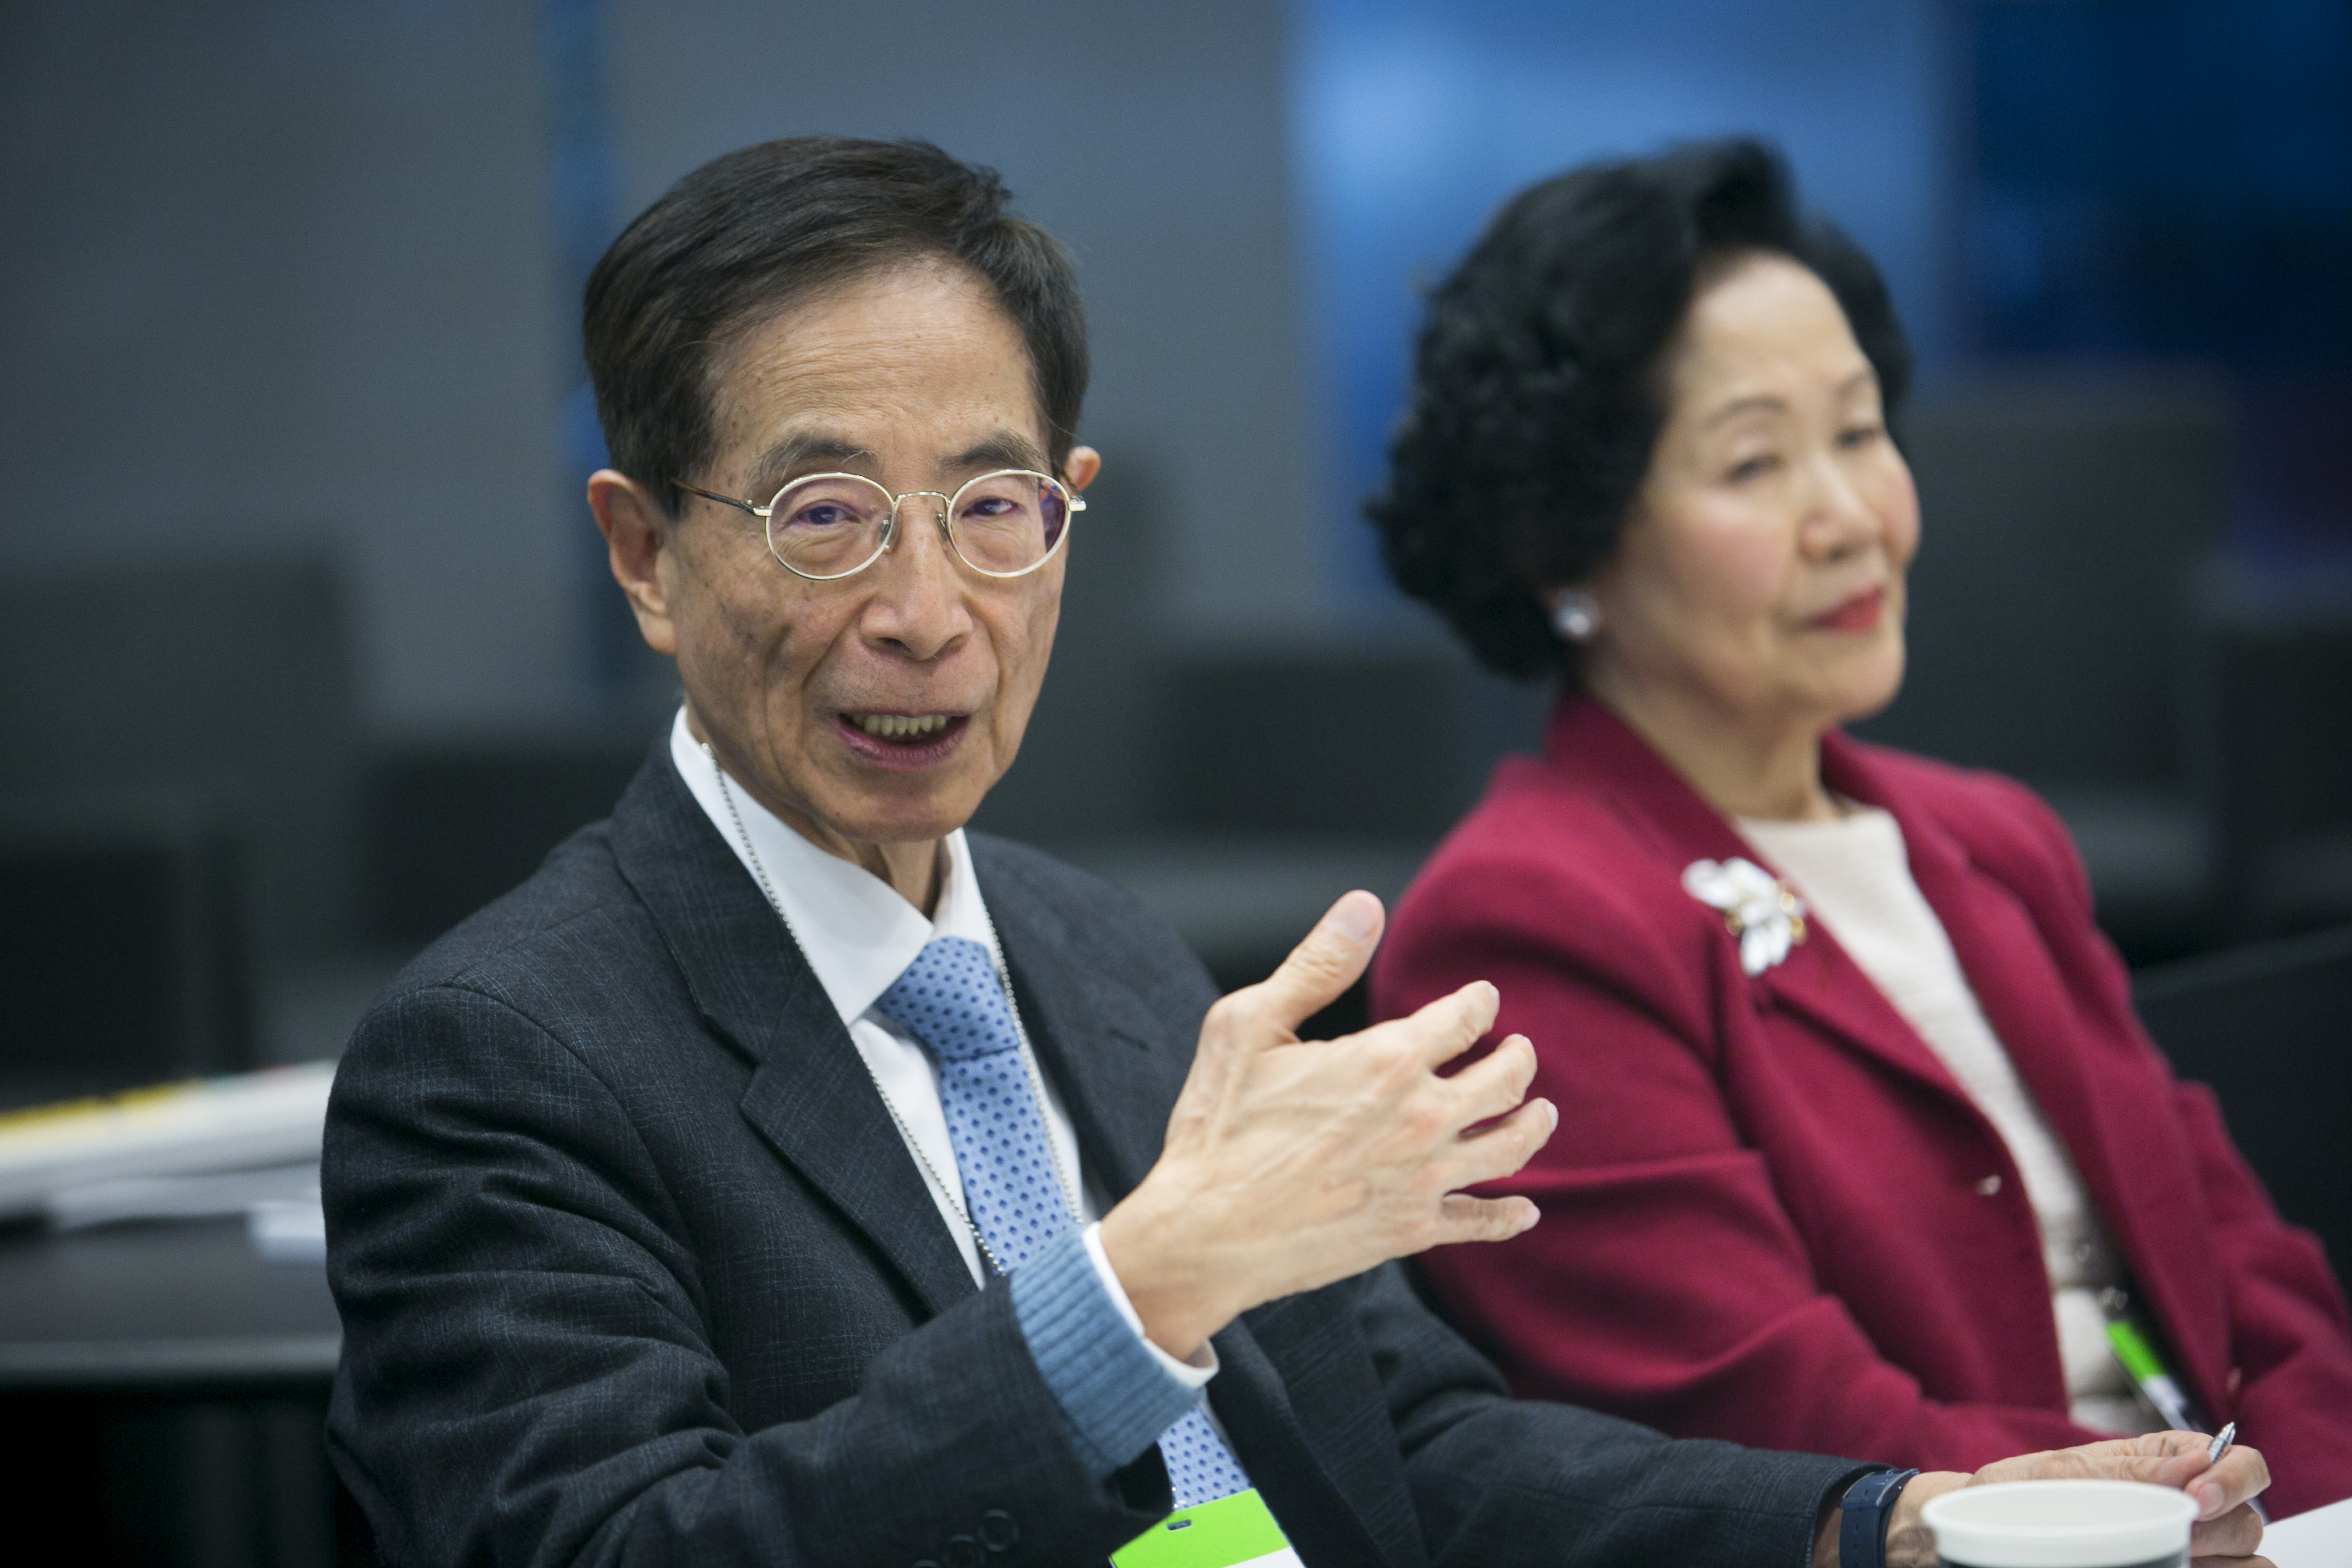 Martin Lee, former member of Hong Kong's Legislative Council, left, speaks as Anson Chan, Hong Kong's former top civil servant, listens during an interview in New York City on March 31, 2014 (Bloomberg/Getty Images)